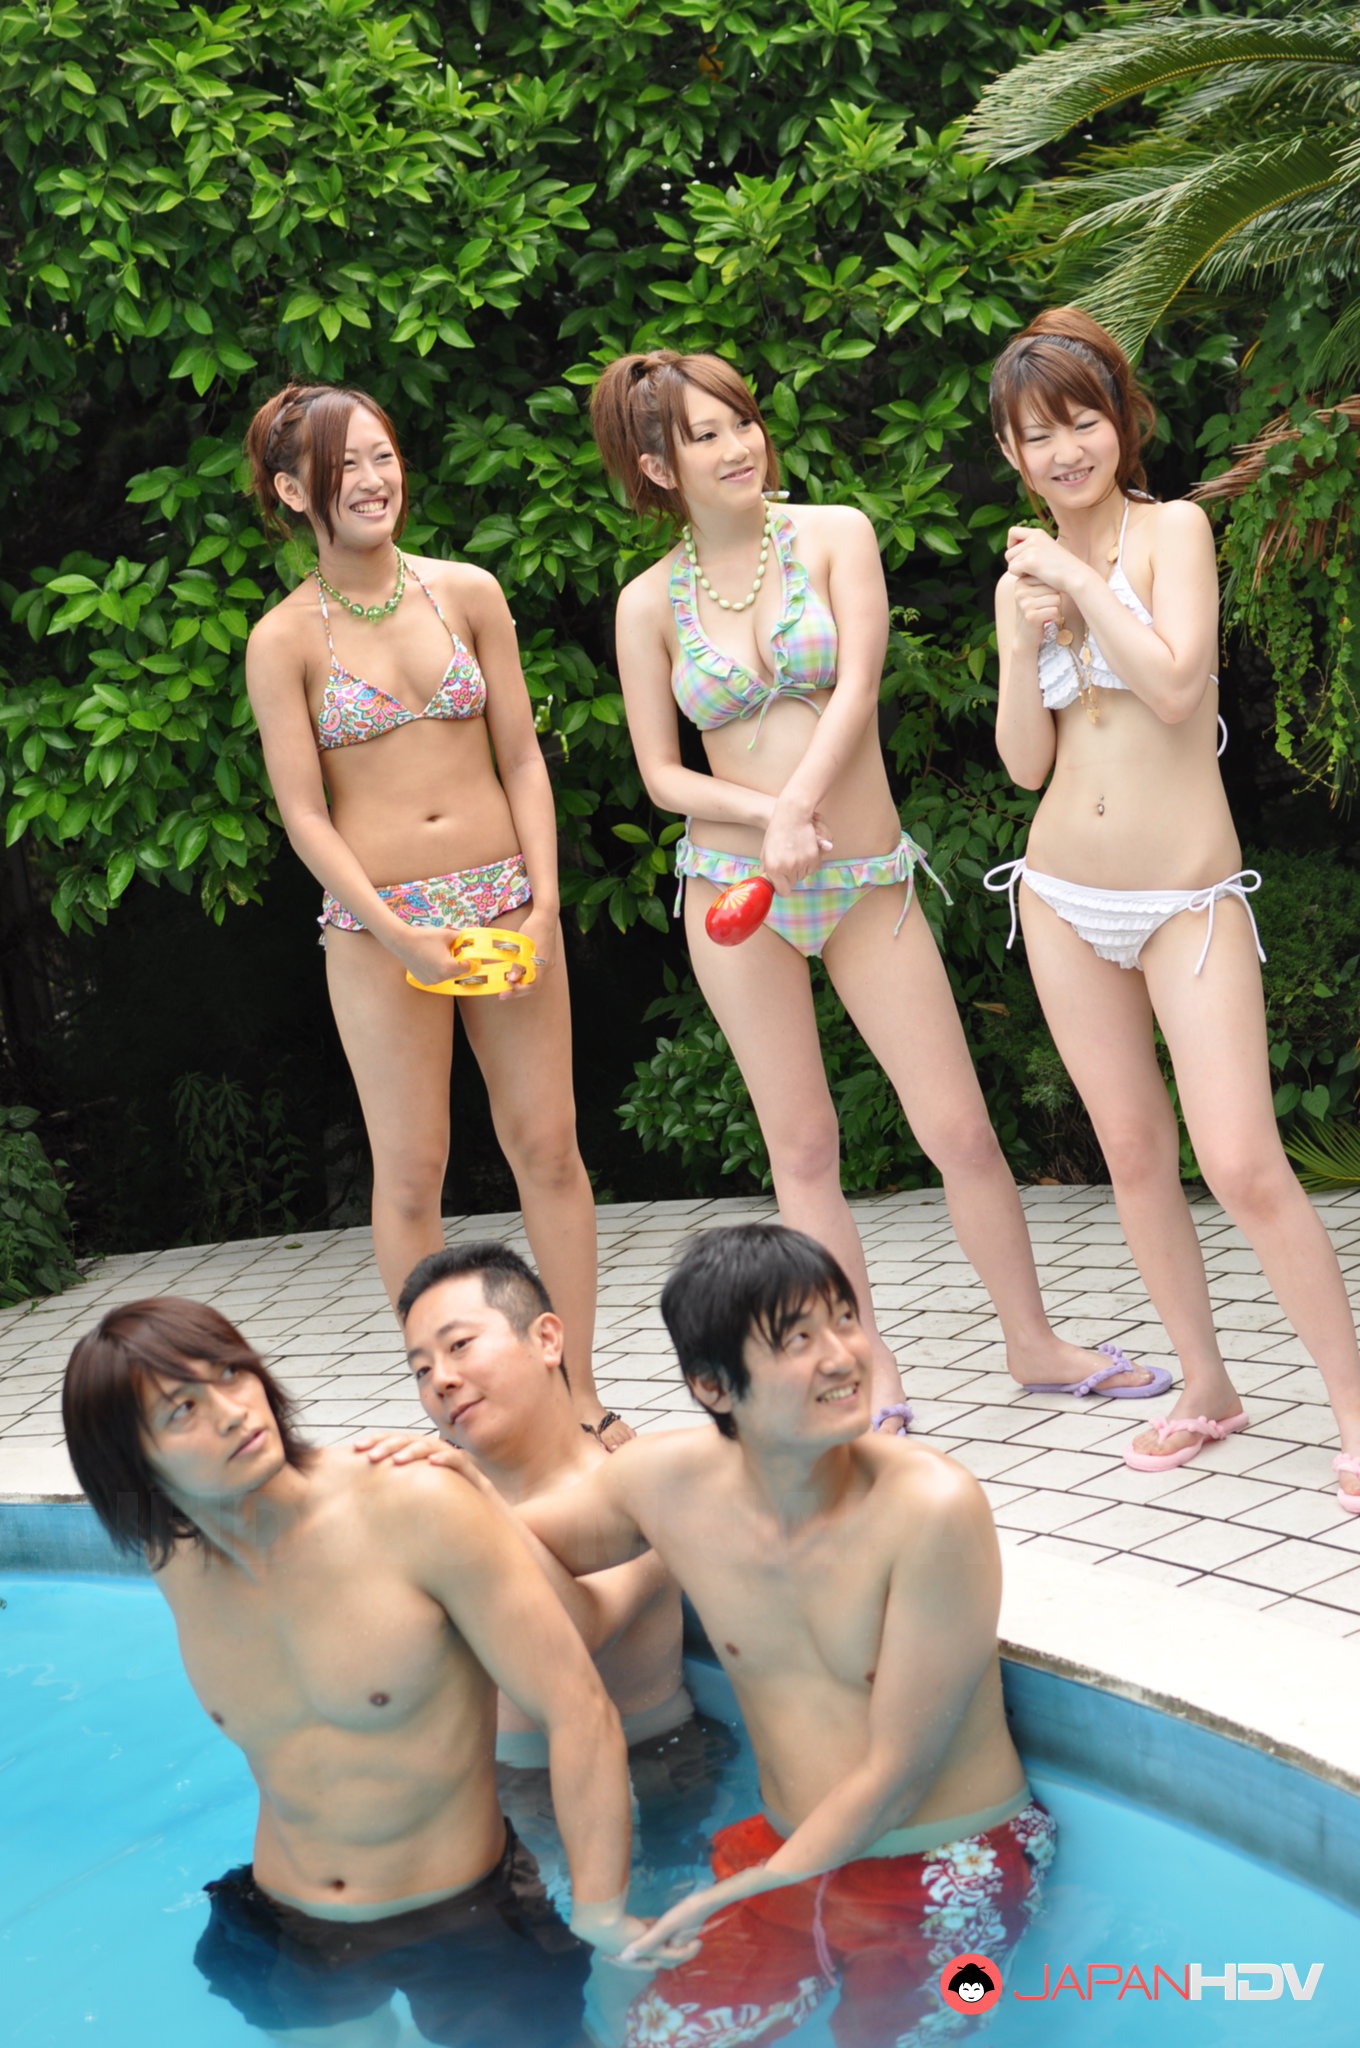 All Girl Party Xxx - Japanese girls enjoy in some sexy pool party